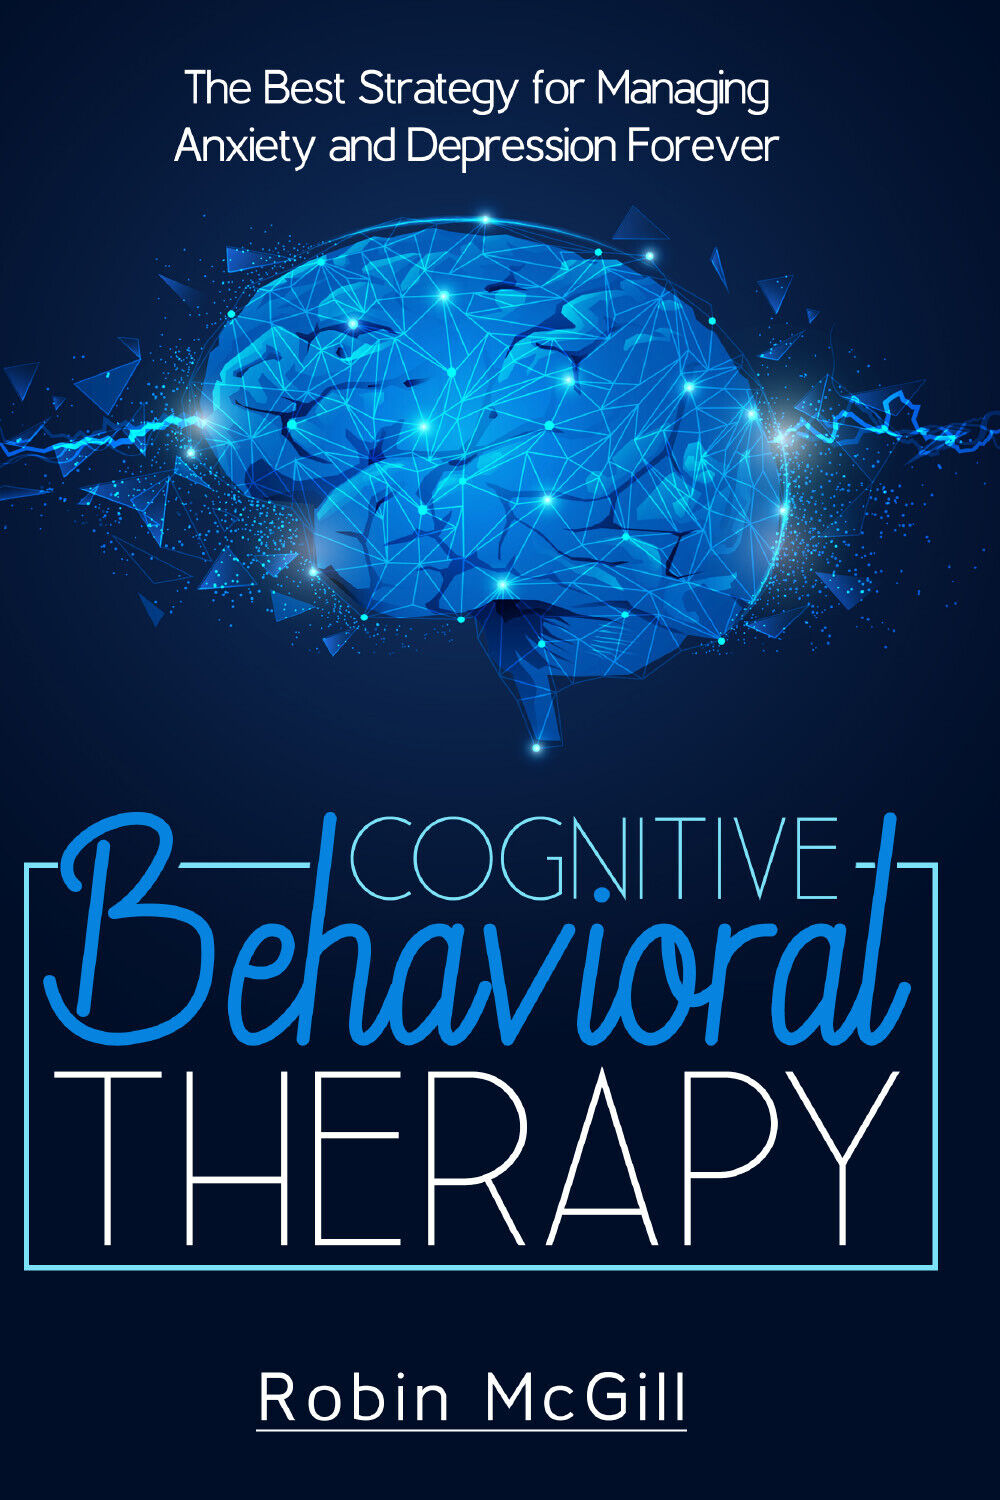 Cognitive Behavioral Therapy. The Best Strategy for Managing Anxiety and Depress